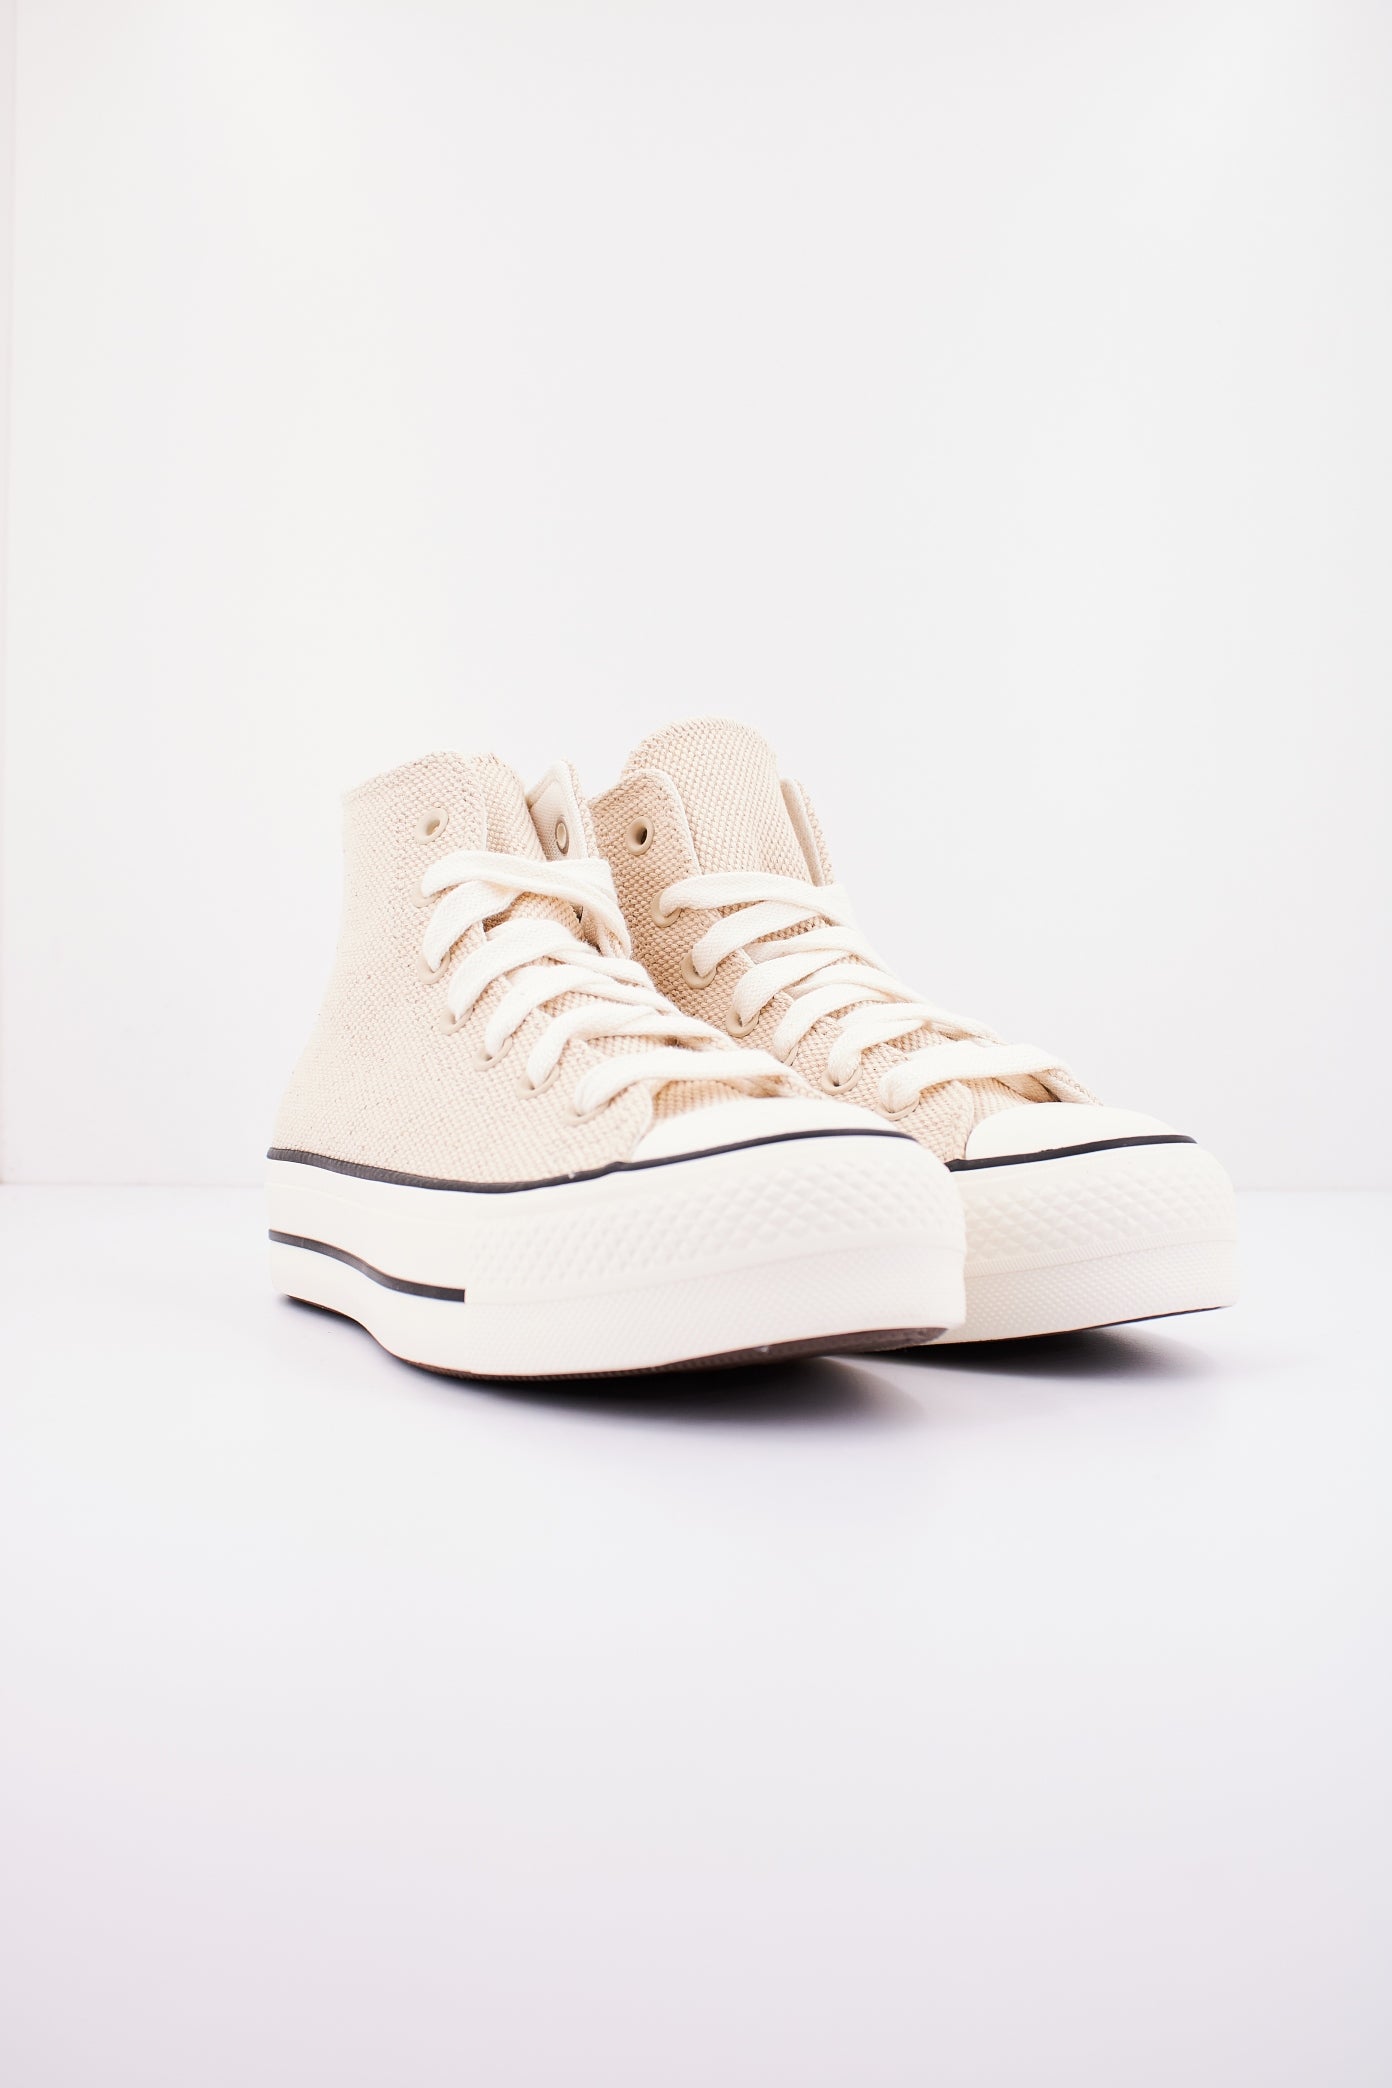 CONVERSE CHUCK TAYLOR ALL LIFT CANVAS & LEATHER en color BEIS  (2)